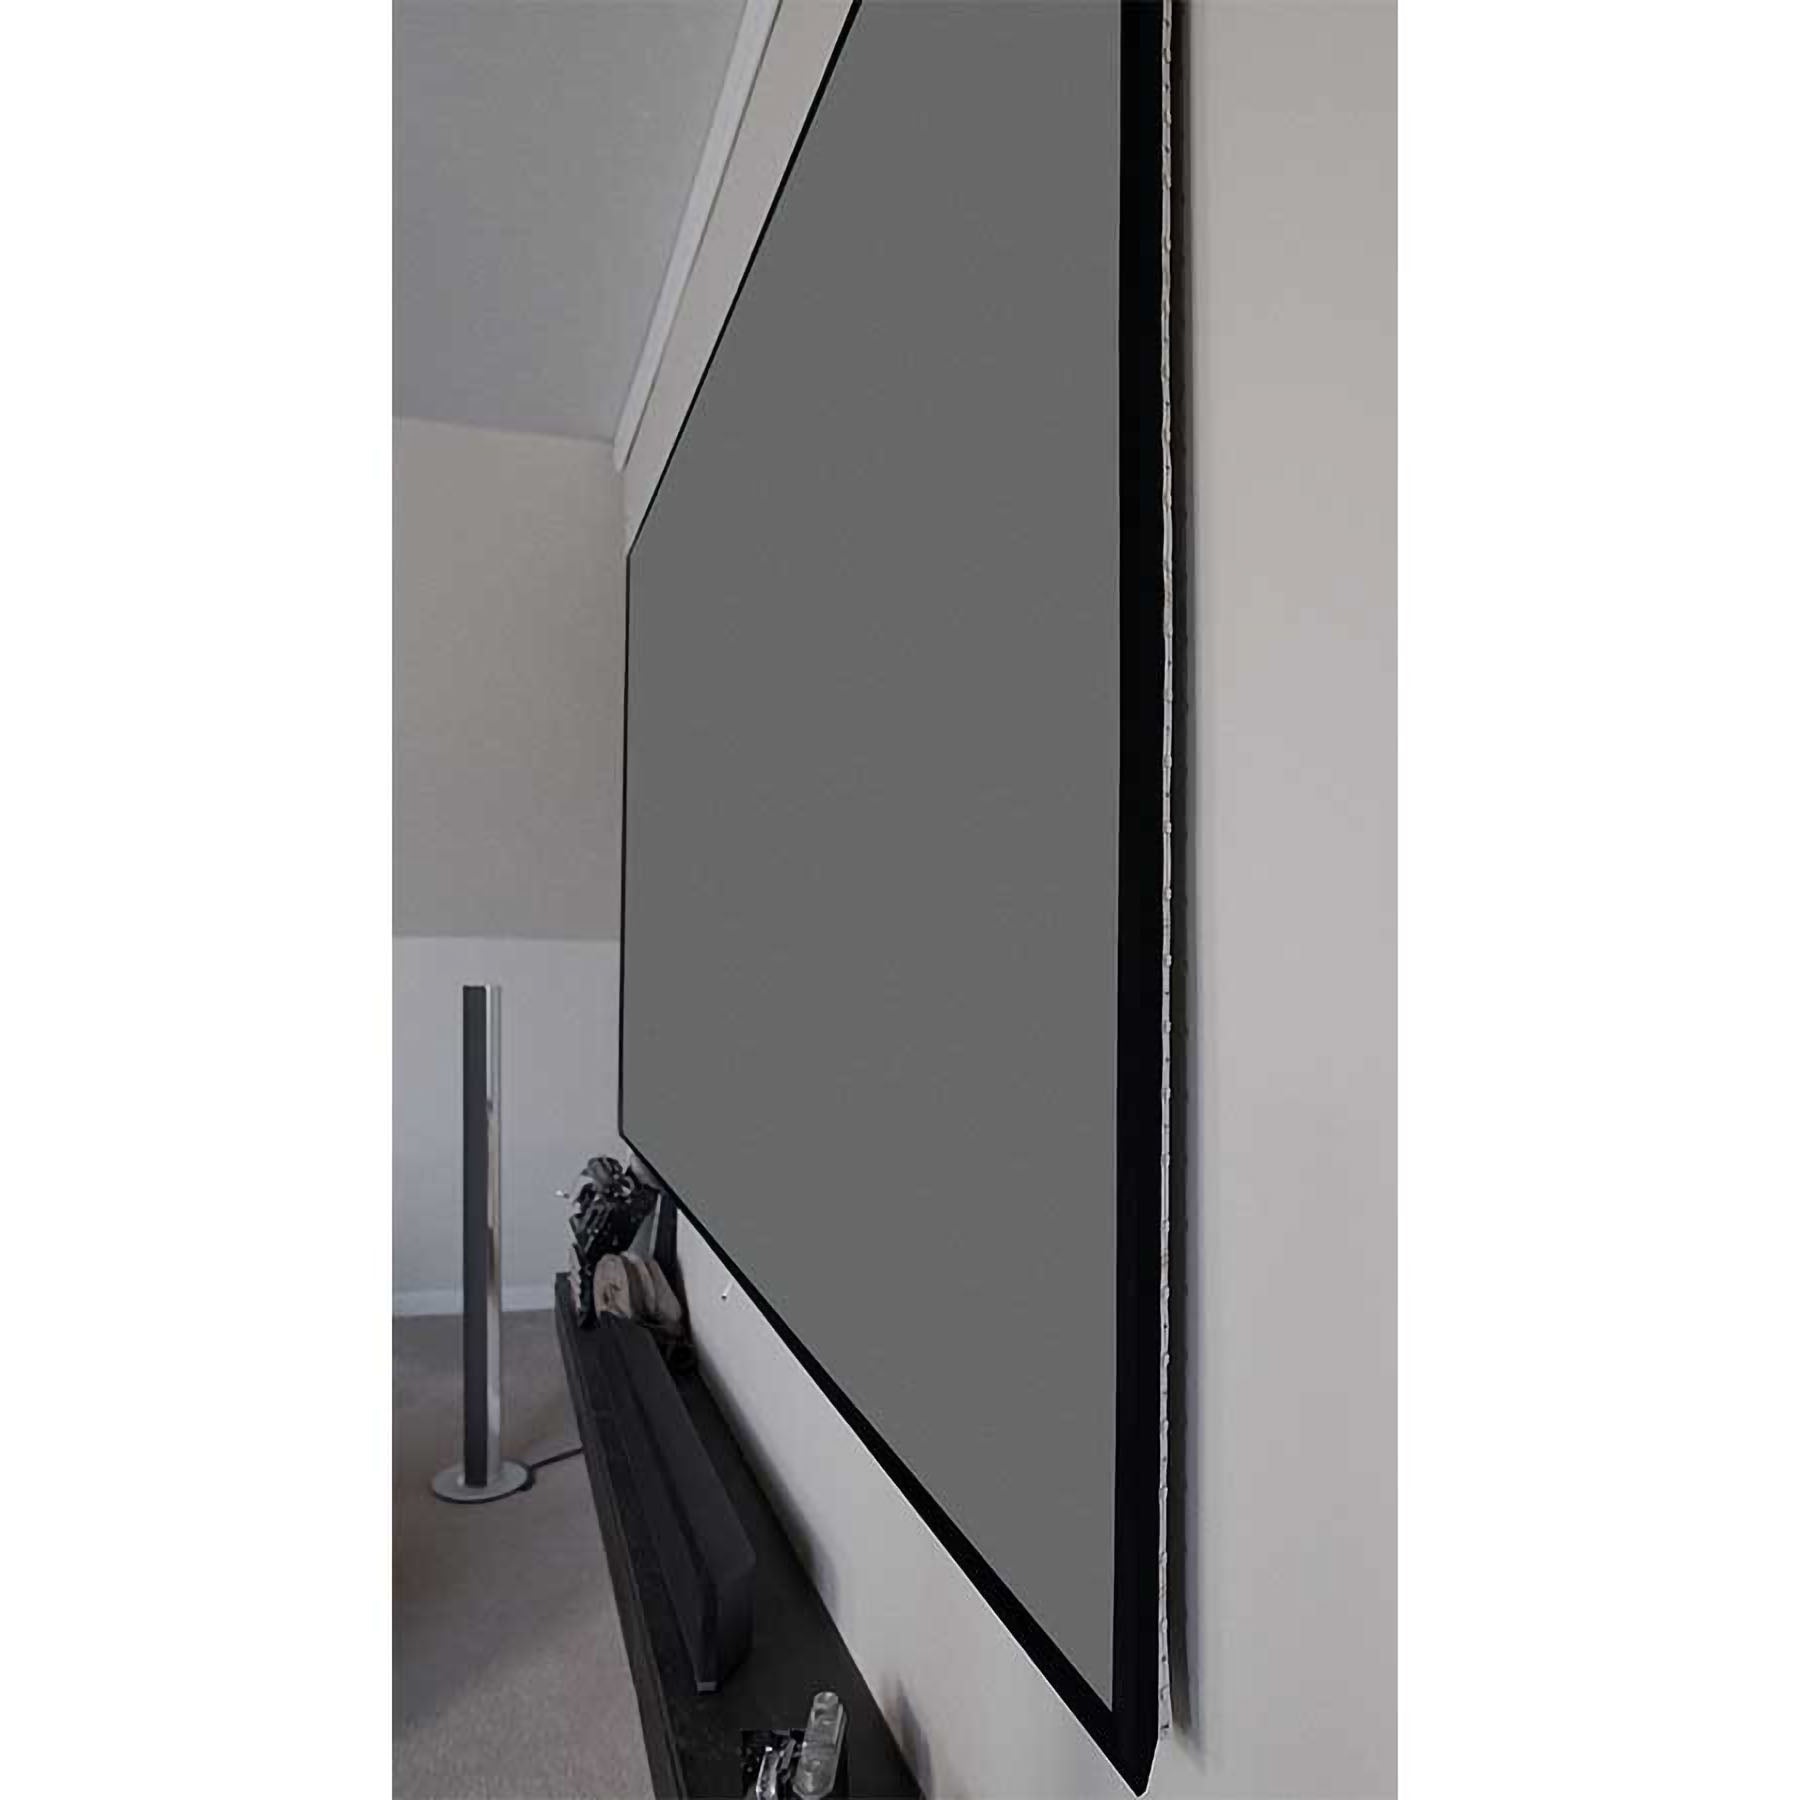 Elite Screens AR150DHD3 Aeon CineGrey 3D 150" 16:9 4K Fixed Screen with Edge Free Frame & Ambient Light Rejecting